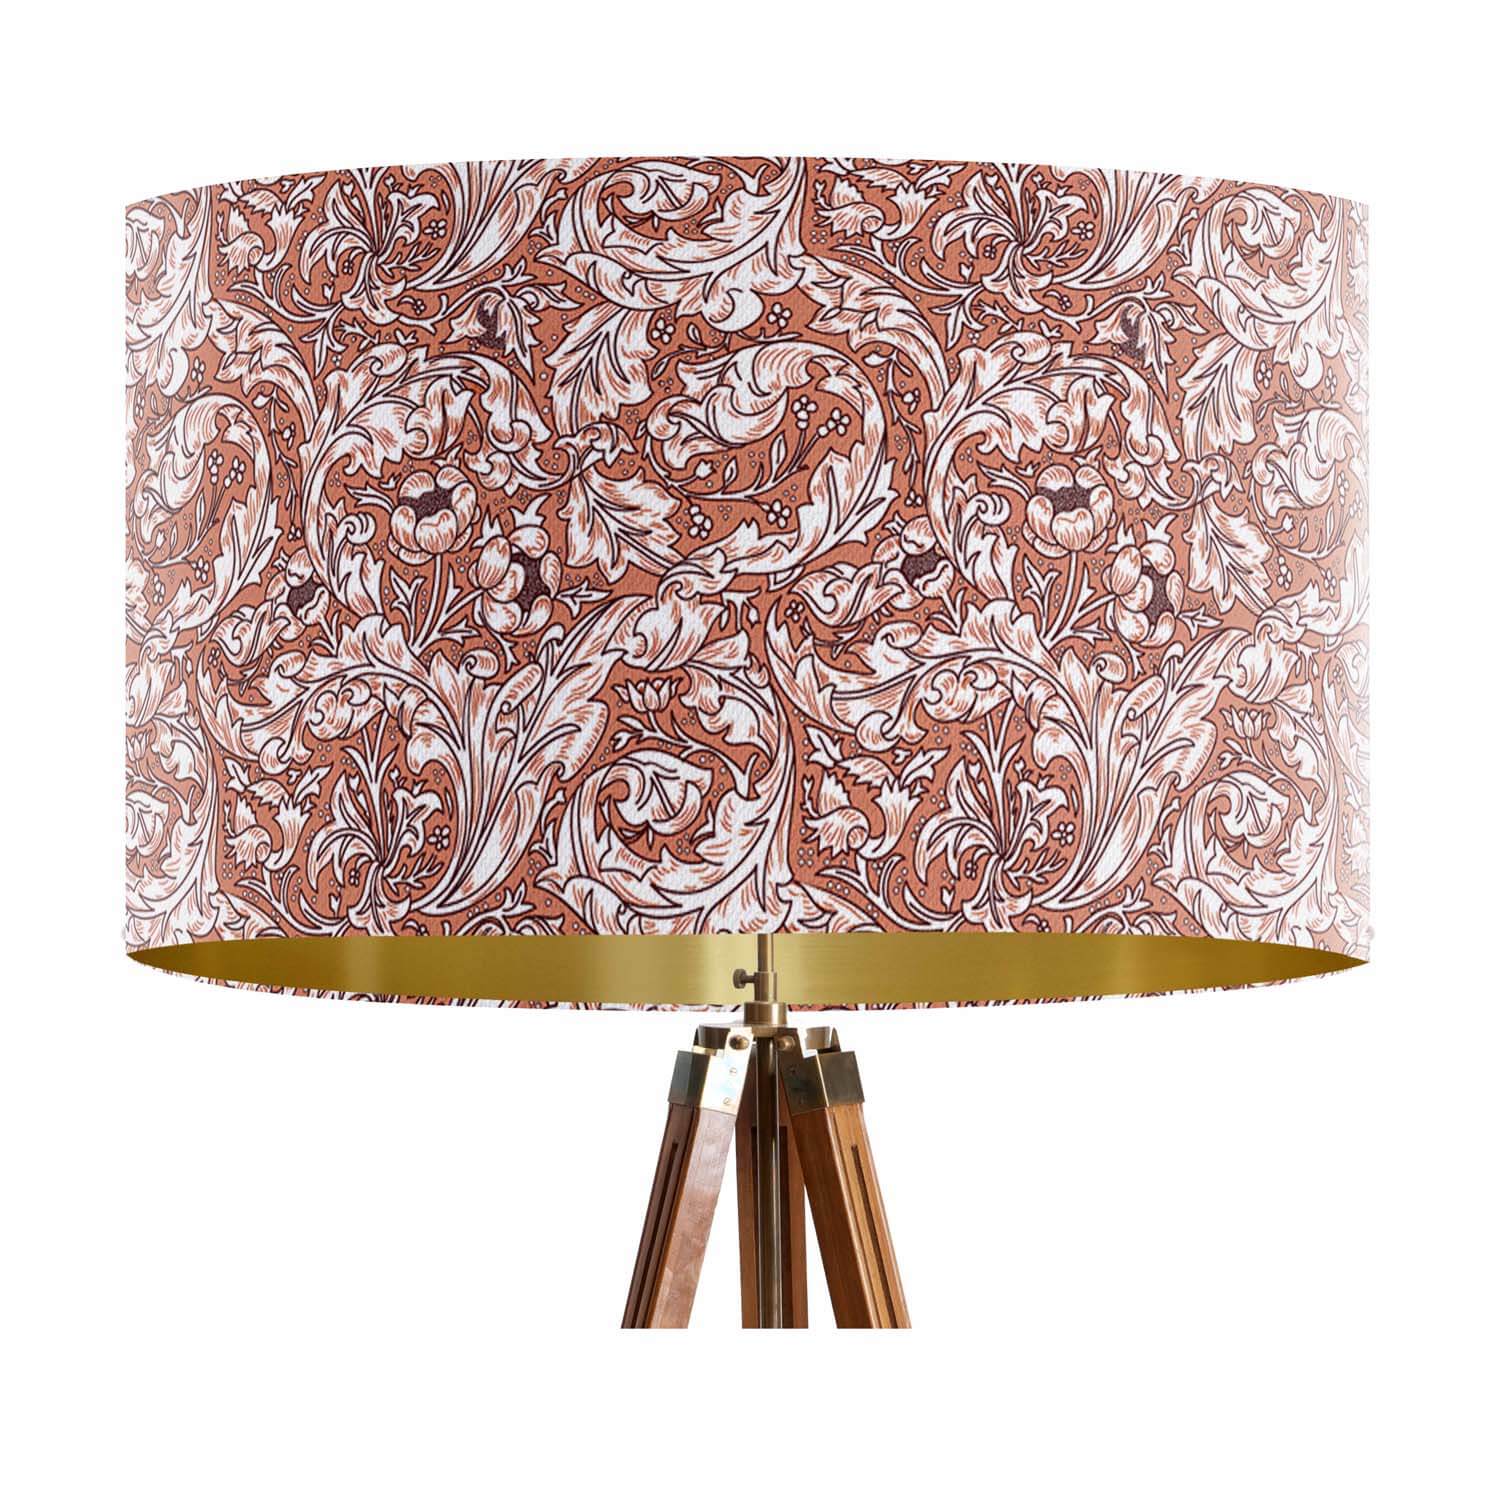 Bachelor's Buttons Dark Peach  - William Morris Gallery Lampshade